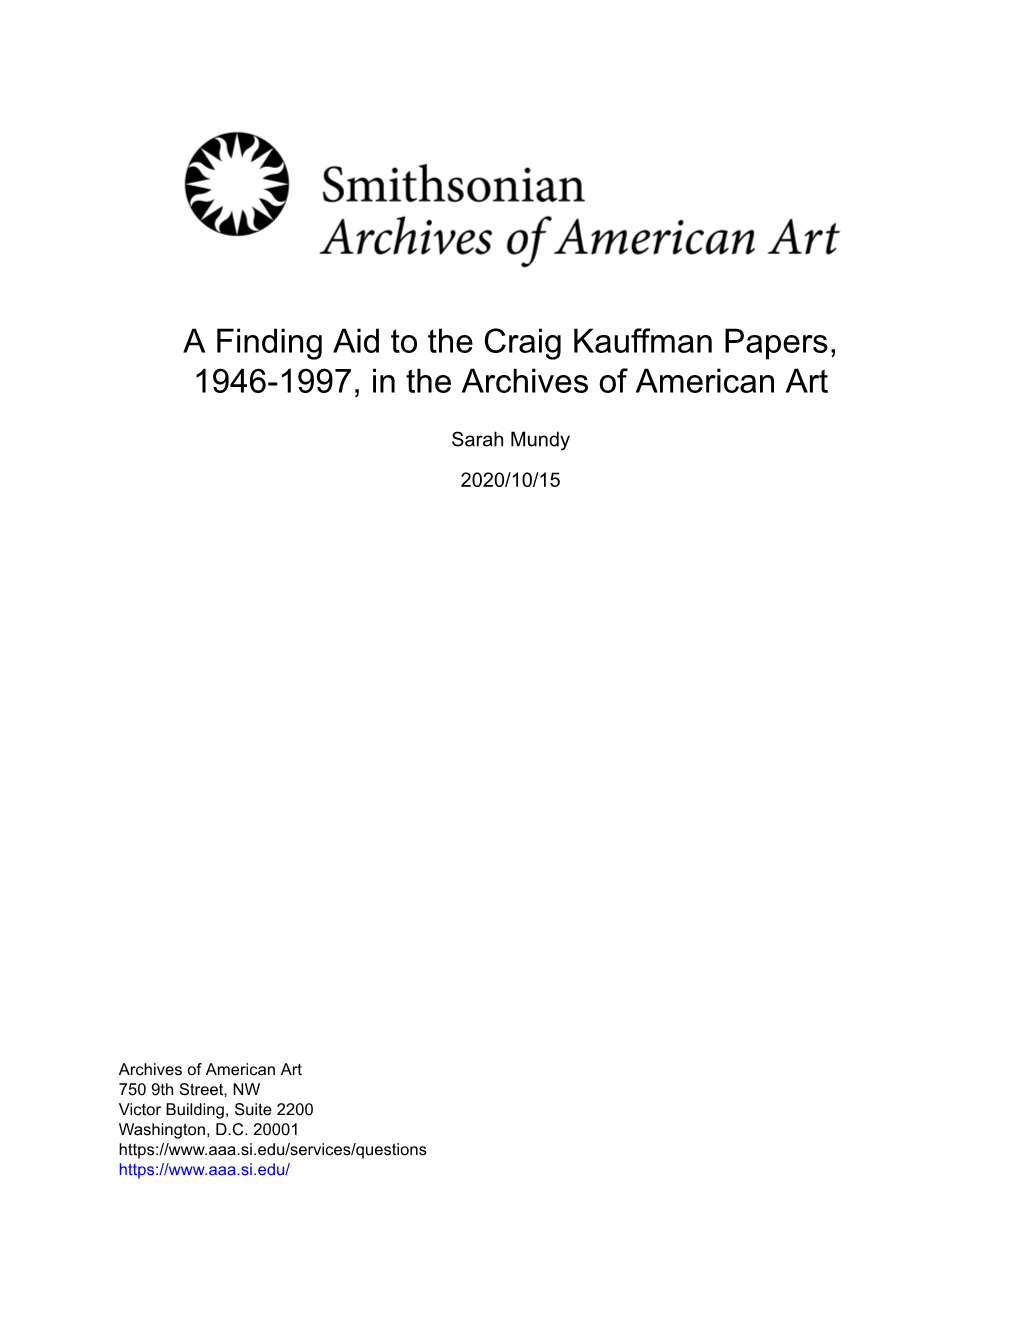 A Finding Aid to the Craig Kauffman Papers, 1946-1997, in the Archives of American Art